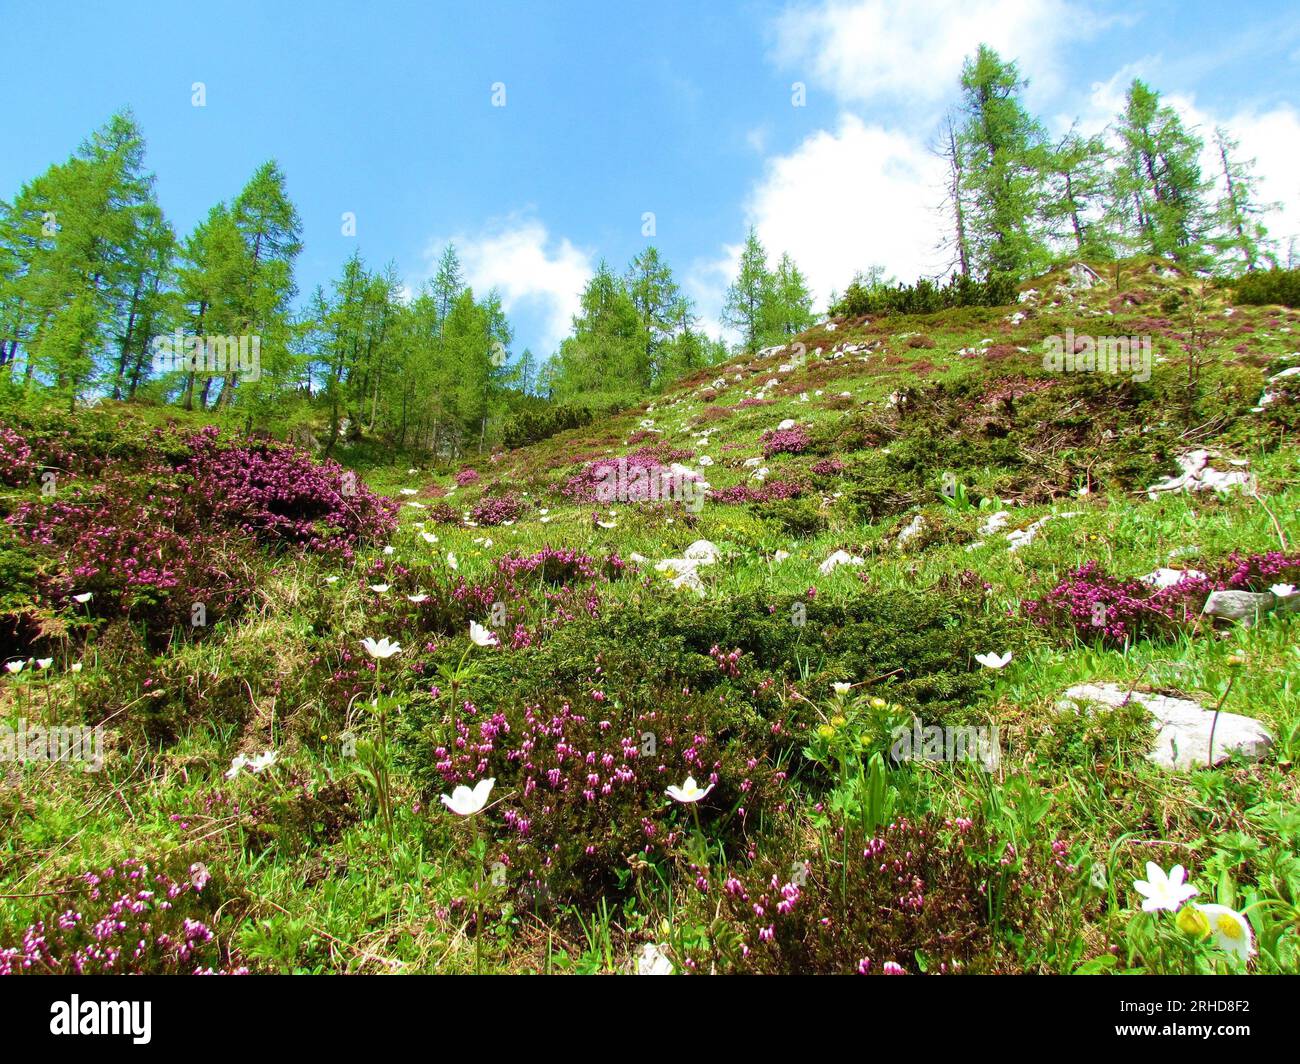 Colorful slope with pink winter heath (Erica carnea) and white alpine pasqueflower (Pulsatilla alpina) flowers and larch trees on the background in Ju Stock Photo